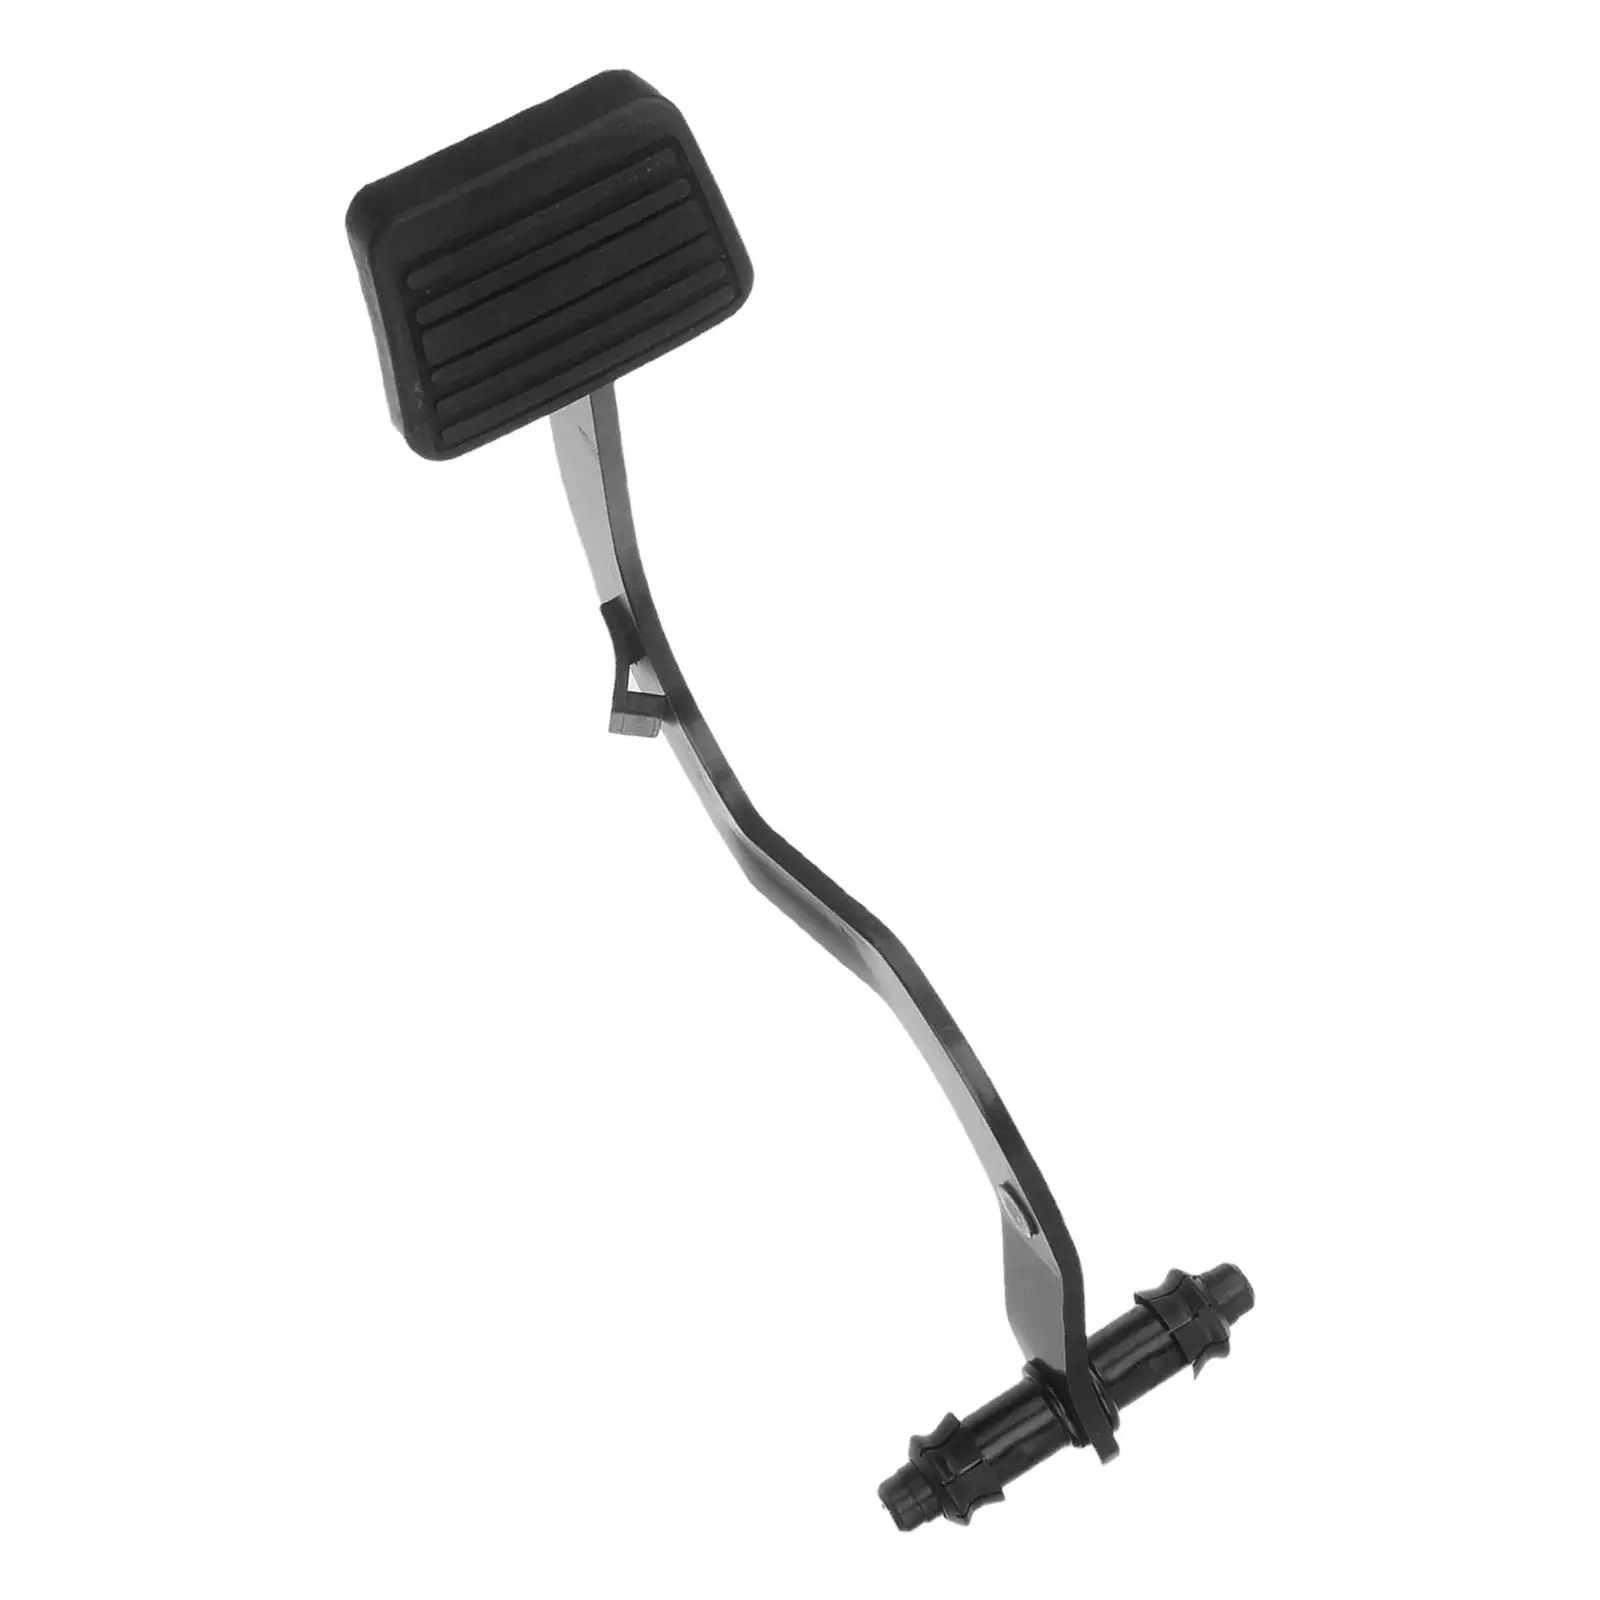 Car Clutch Pedal 15000456 A15000456 Replacement Sturdy for Chevrolet C1500 C2500 C3500